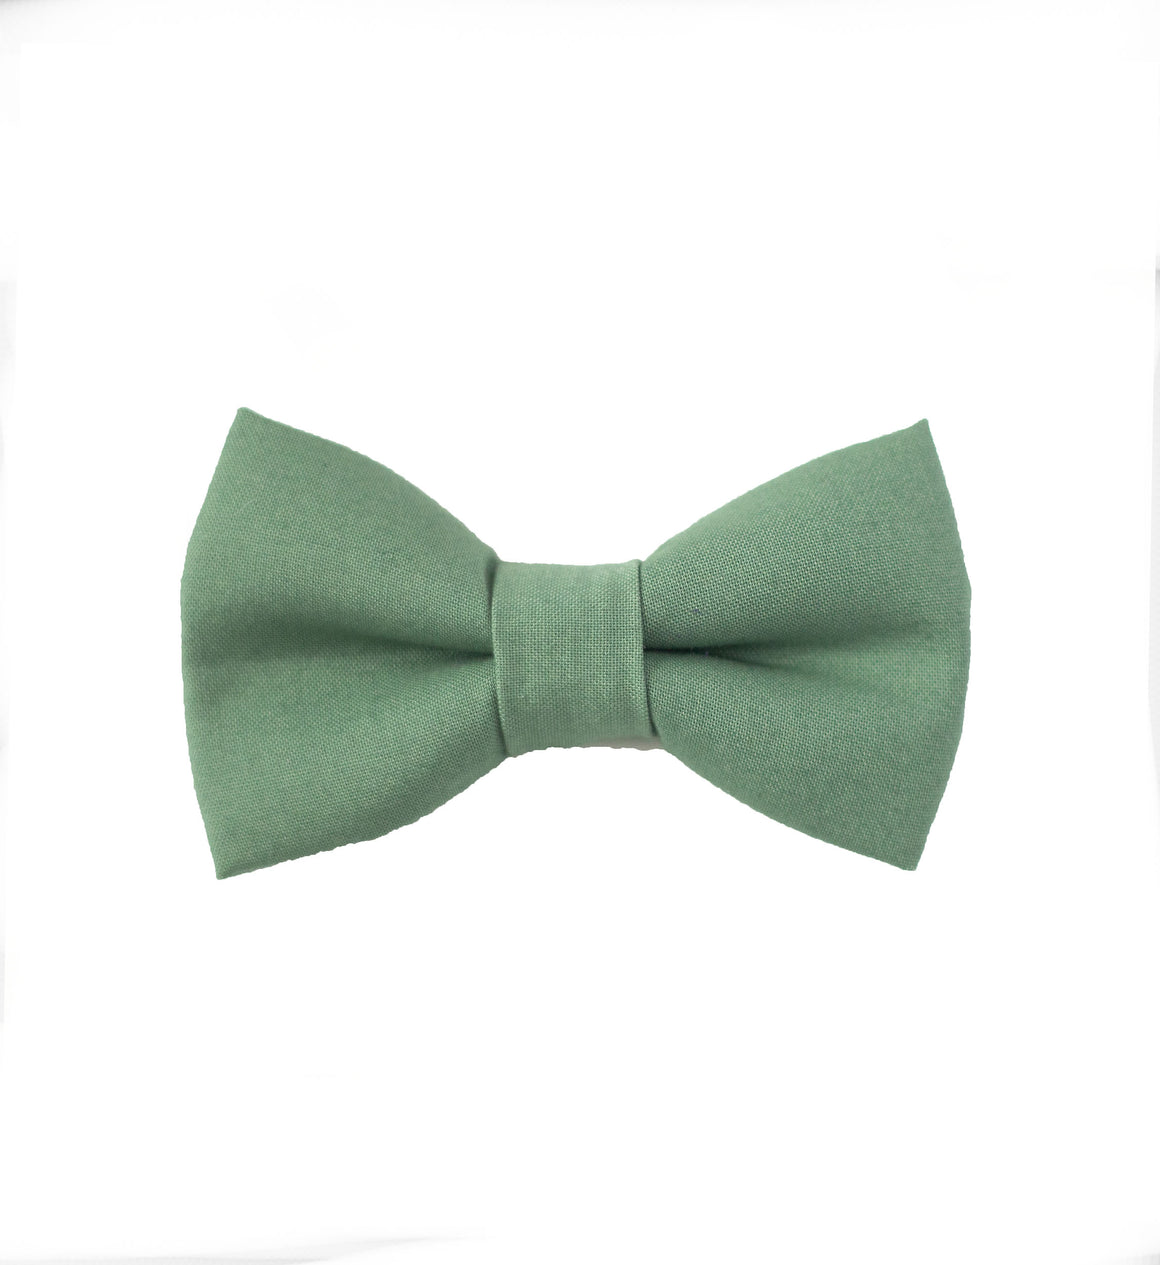 Moss Green Bow Tie - Newborn To Adult Sizes